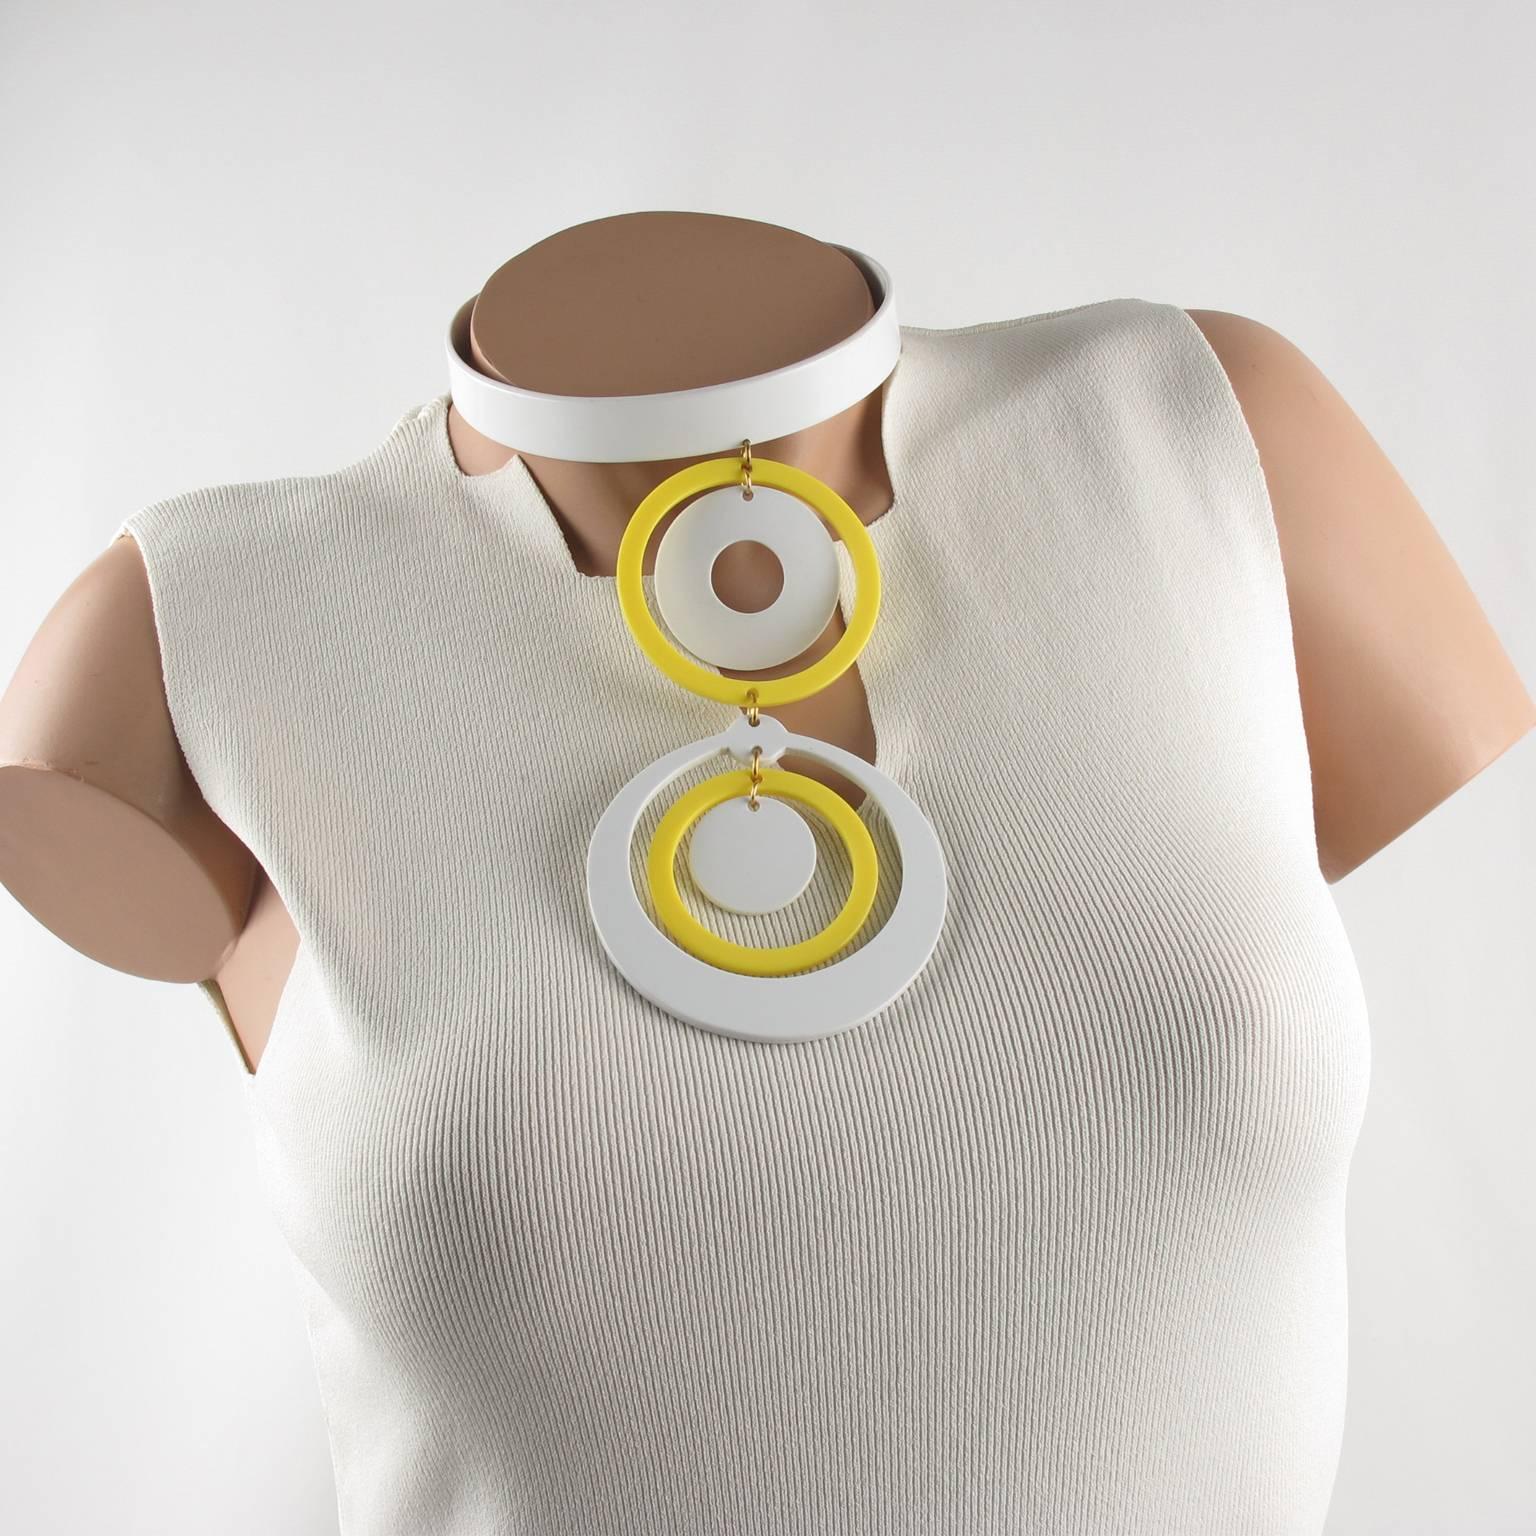 Stunning French designer Andre Courreges geometric-shaped, mod yellow and white dog collar necklace. Space age choker features different sized linked cut-out plastic or lucite disks. No visible marking. 
Measurements: necklace drop 6.50 in. long